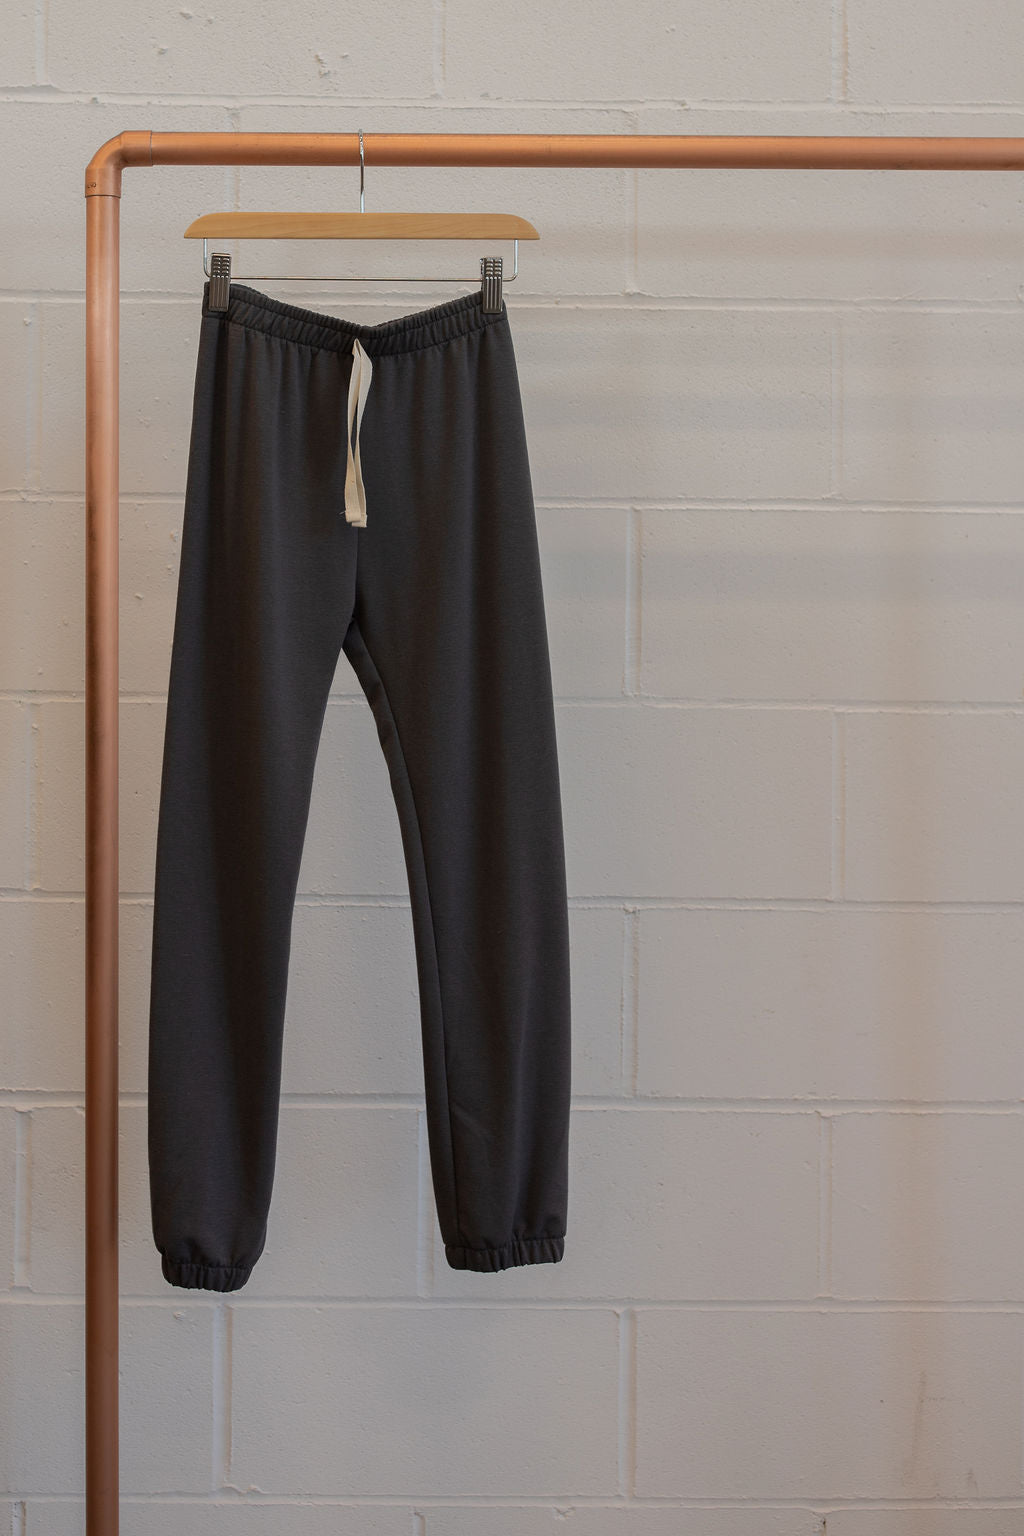 Back to Basics:  Youth Terry Sweatpants